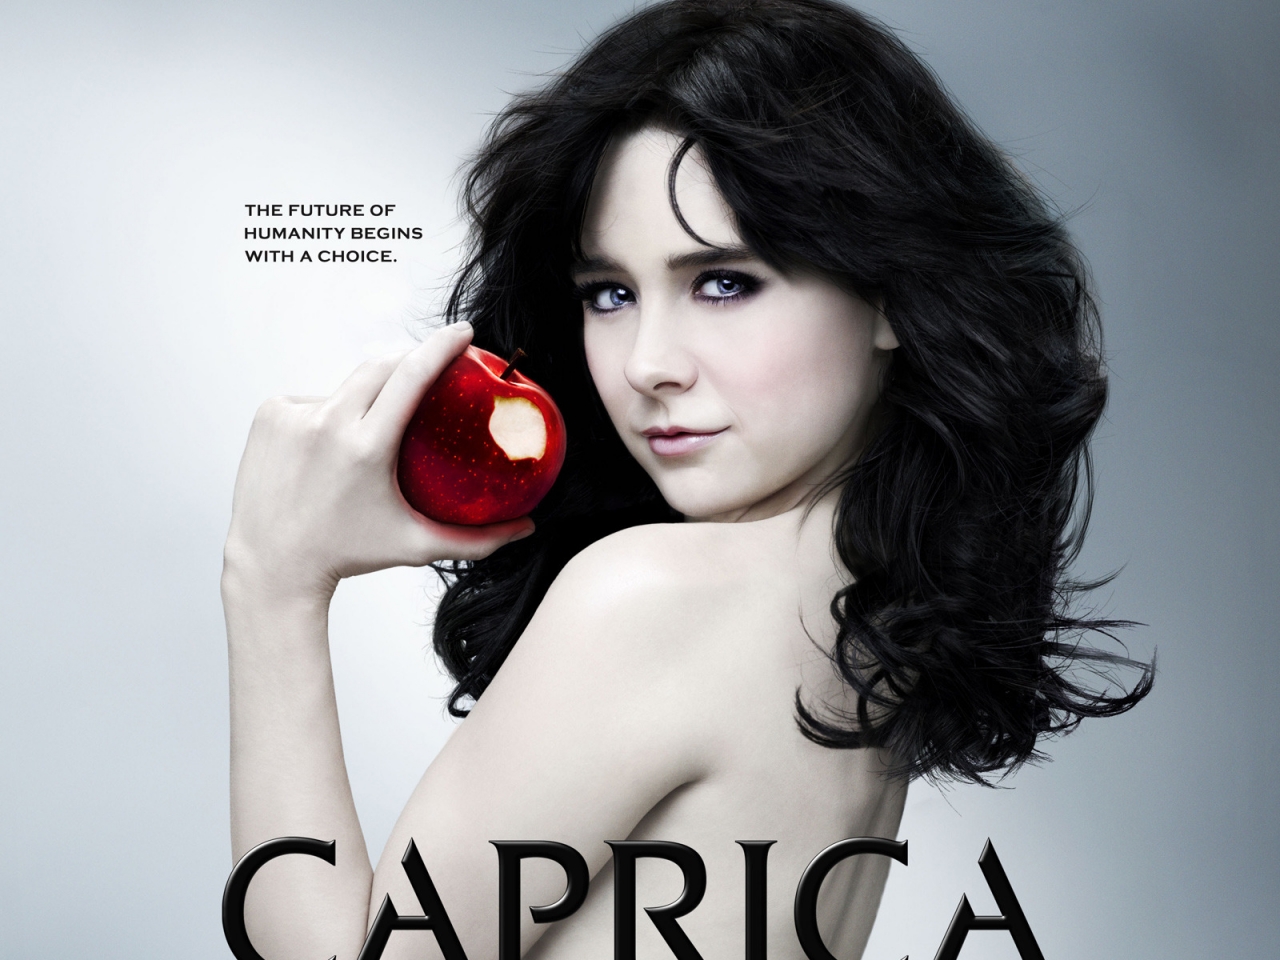 Caprica for 1280 x 960 resolution